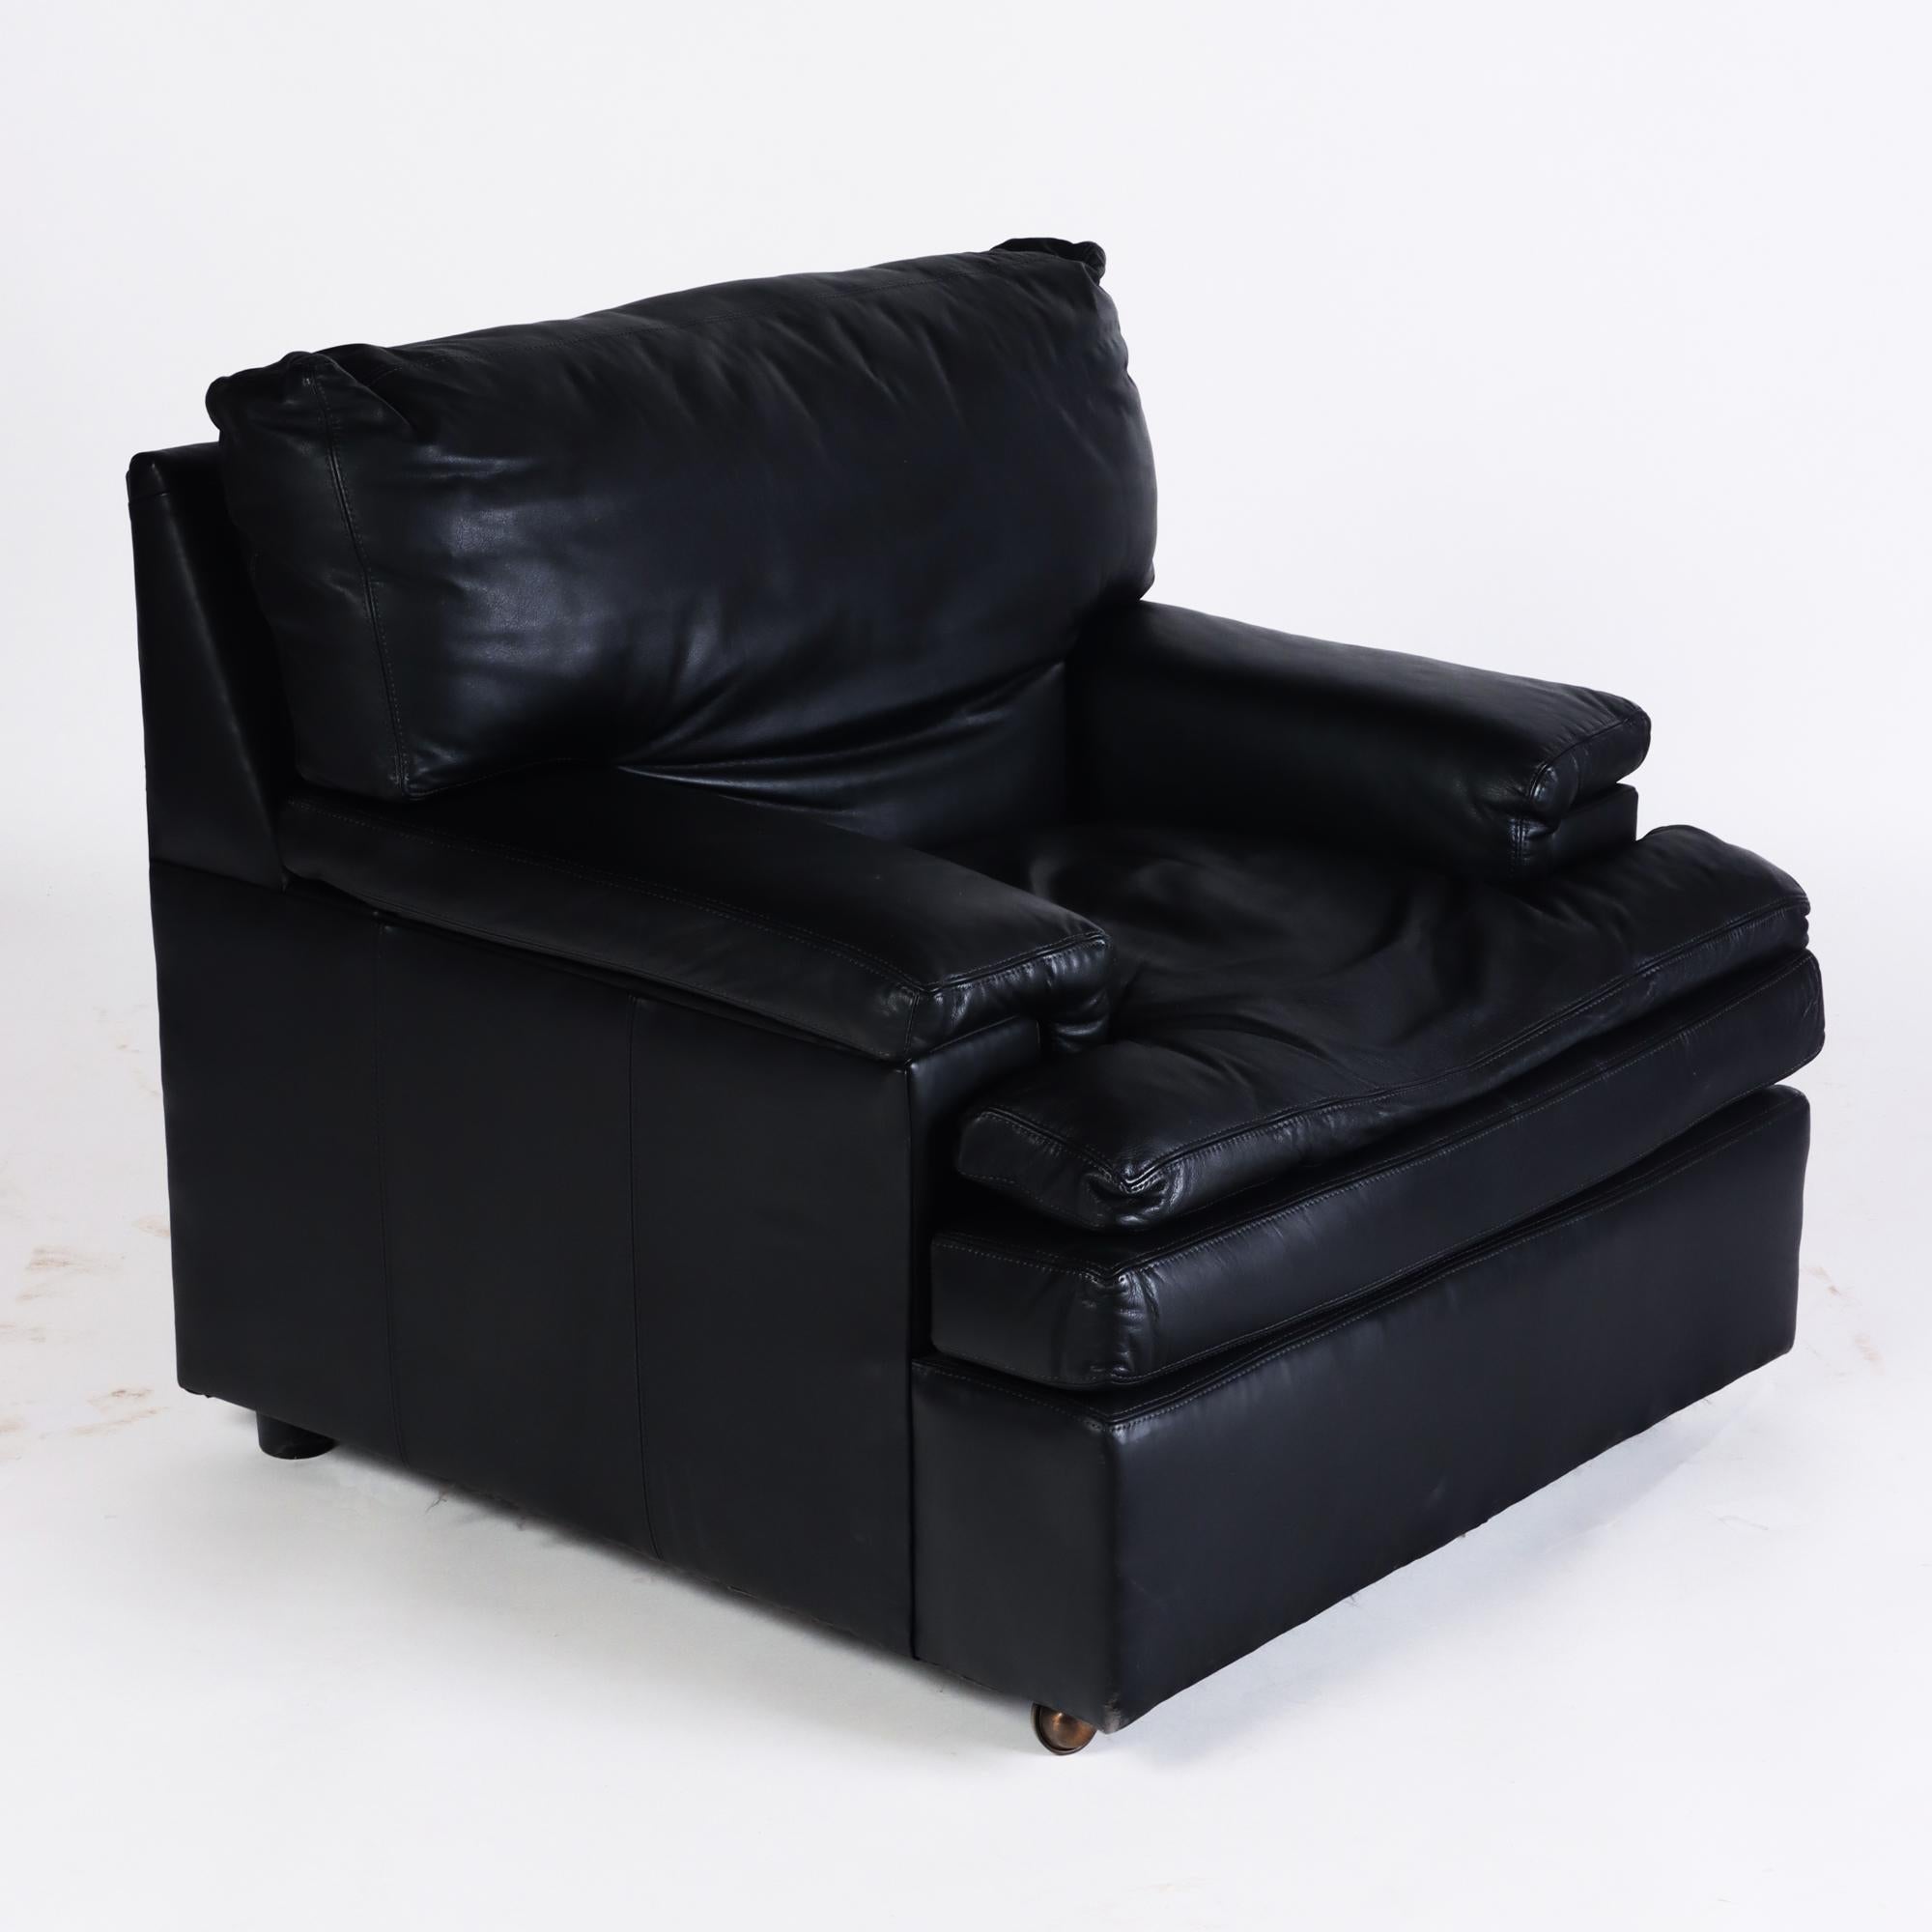 Pair of French Vintage Roche Bobois Black Leather Club Chairs, circa 1970s 4